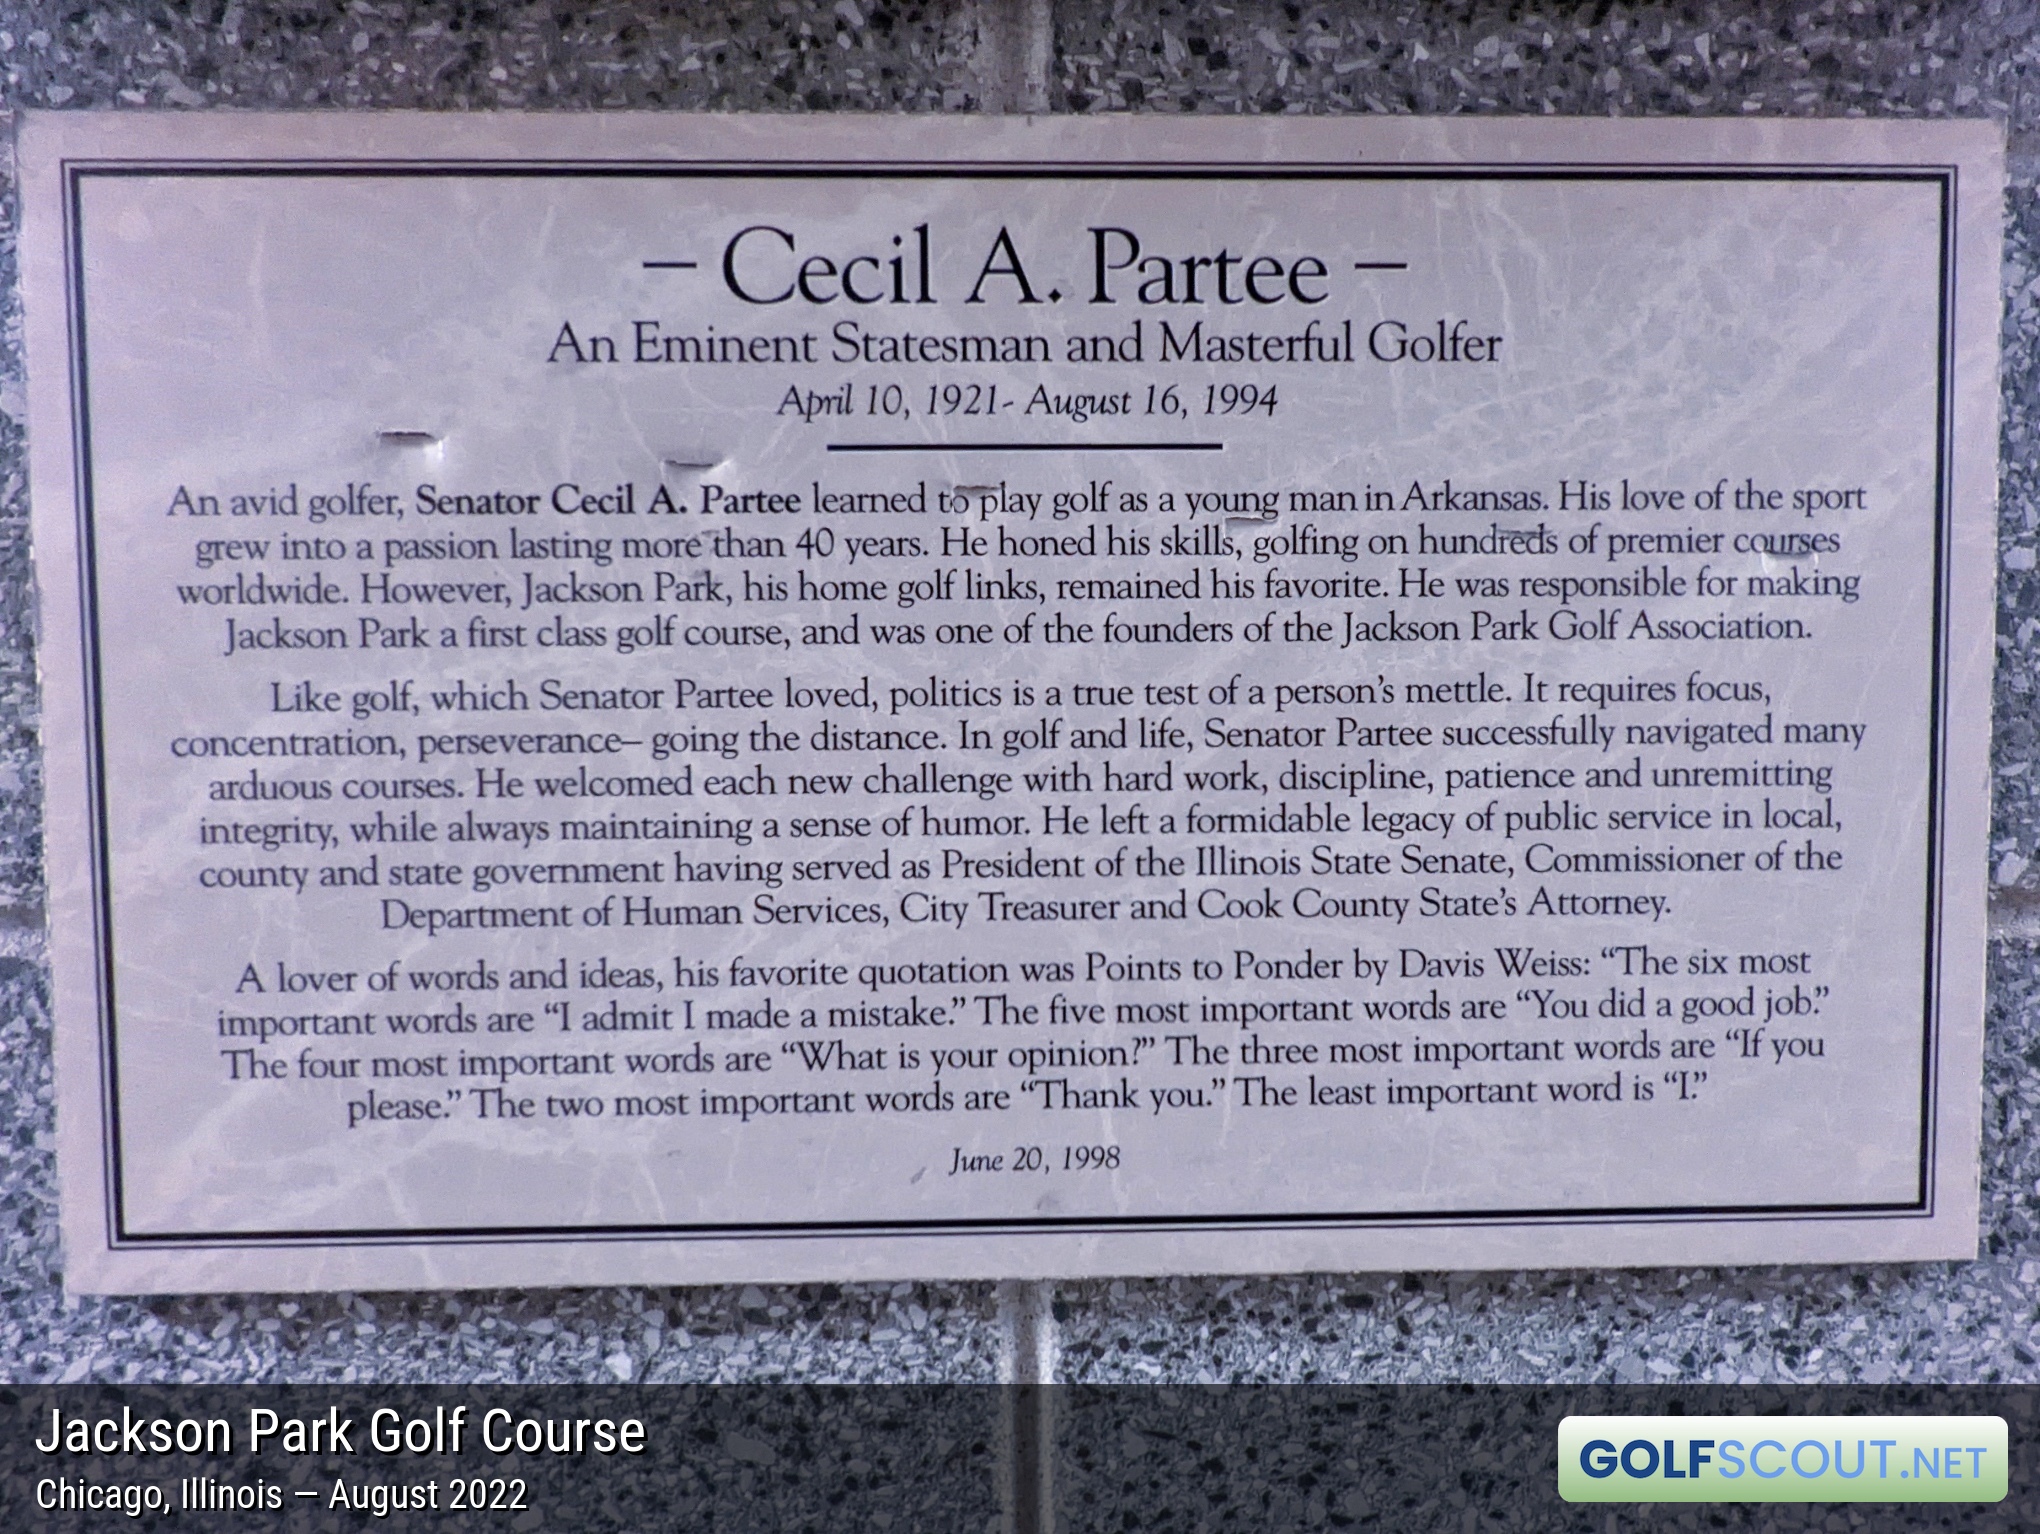 Miscellaneous photo of Jackson Park Golf Course in Chicago, Illinois. “Cecil A. Partee, an Eminent Statesman and Masterful Golfer. An avid golfer, Senator Cecil A. Partee learned to play golf as a young man in Arkansas. His love of the sport grew into a passion lasting more than 40 years. He honed his skills, golfing on hundreds of premier courses worldwide. However, Jackson Park, his home golf links, remained his favorite. He was responsible for making Jackson Park a first class golf course, and was one of the founders of the Jackson Park Golf Association.”